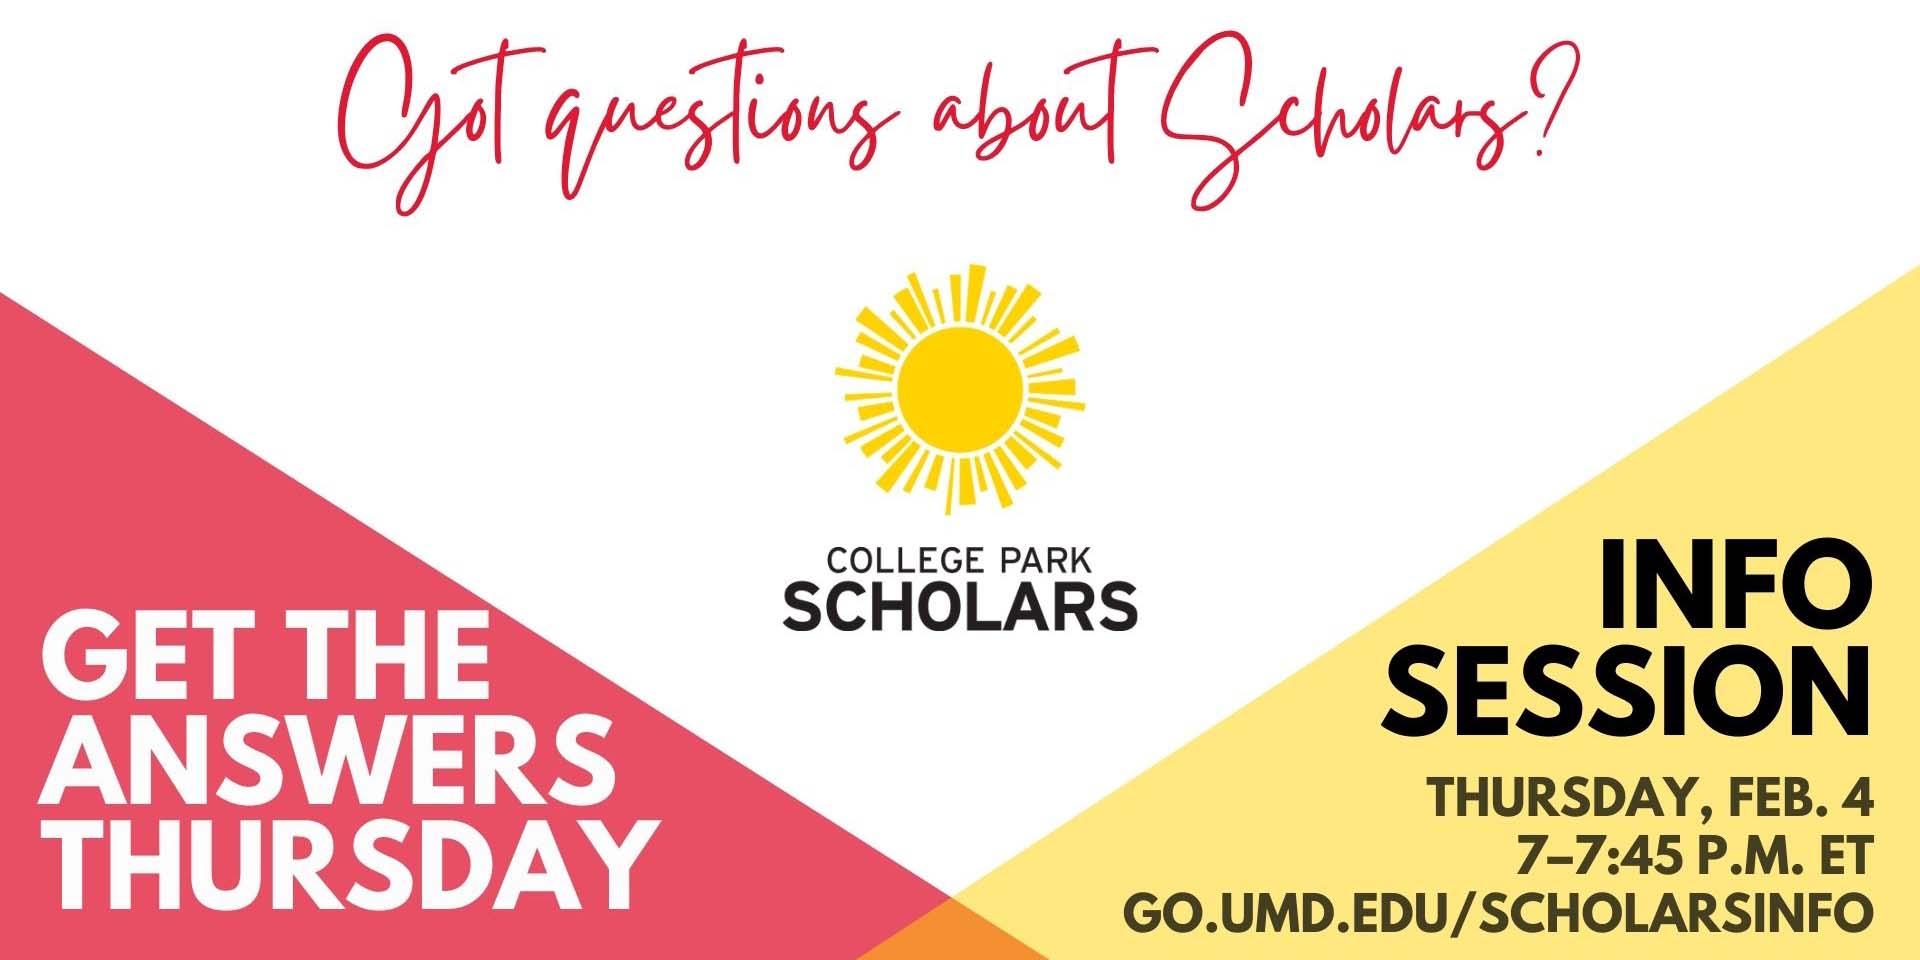 If you have questions about Scholars, you can get the answers Thursday at the Scholars info session, Feb. 4, 7–7:45 p.m. ET